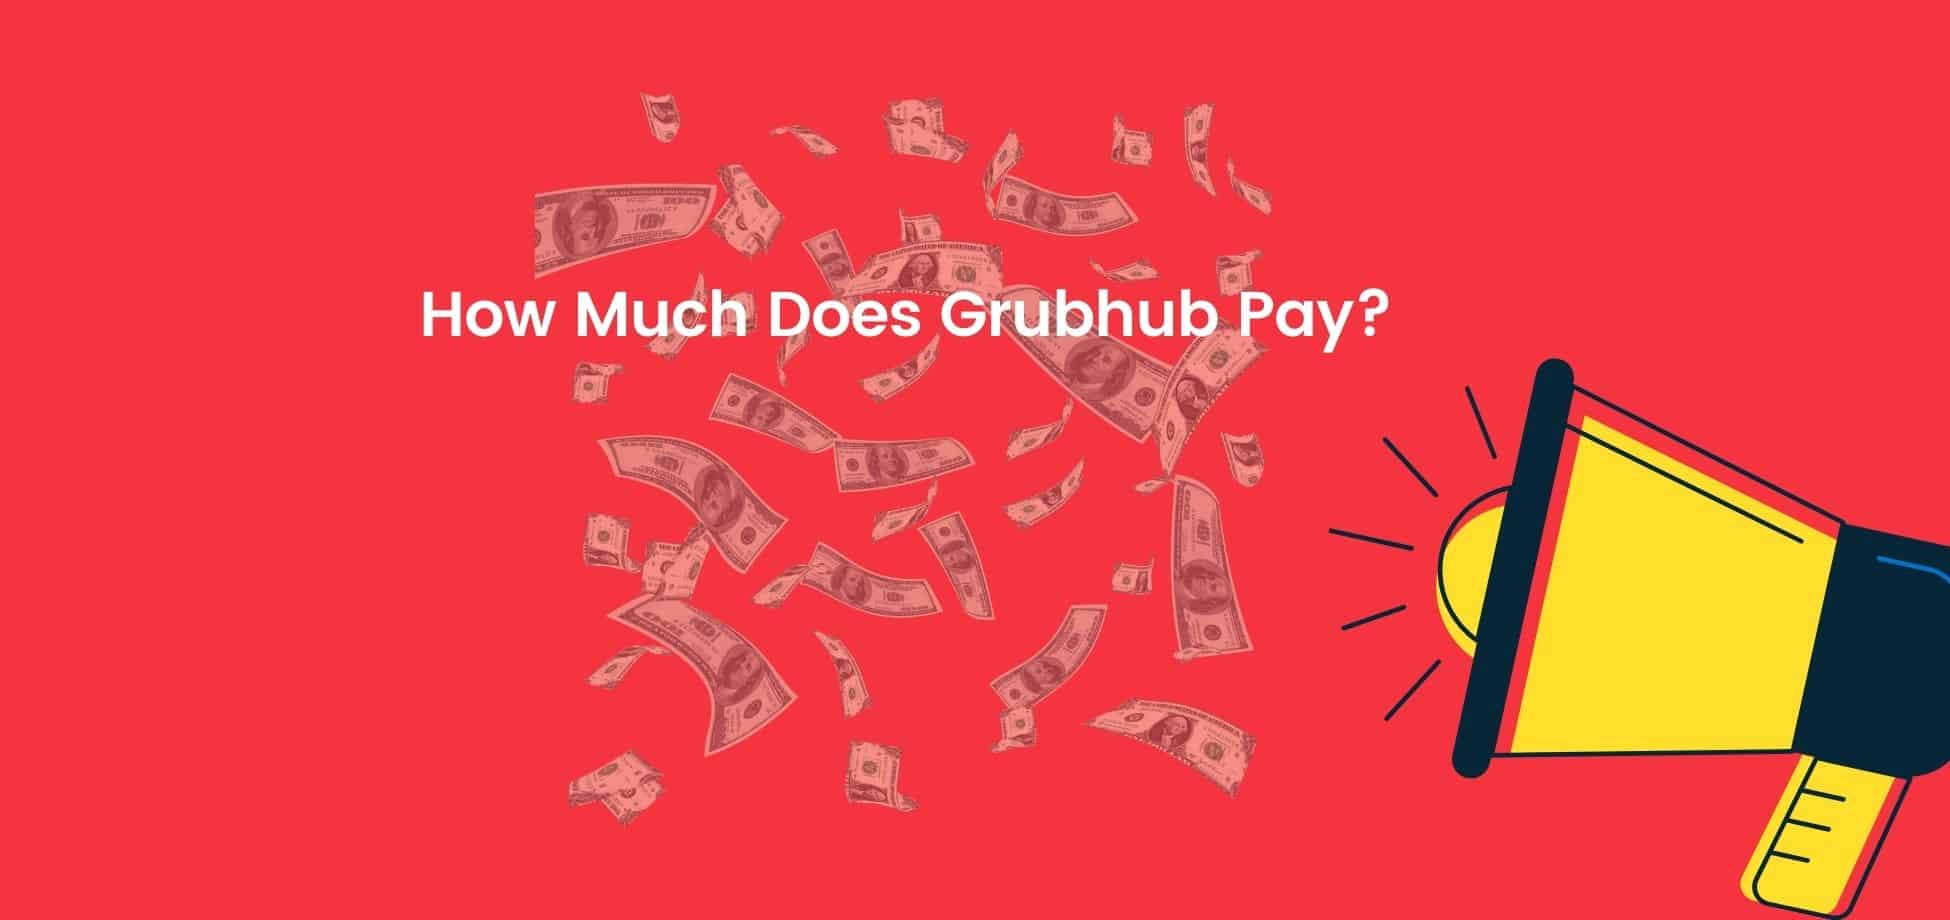 Grubhub pay for drivers is about average for a courier/driver position.